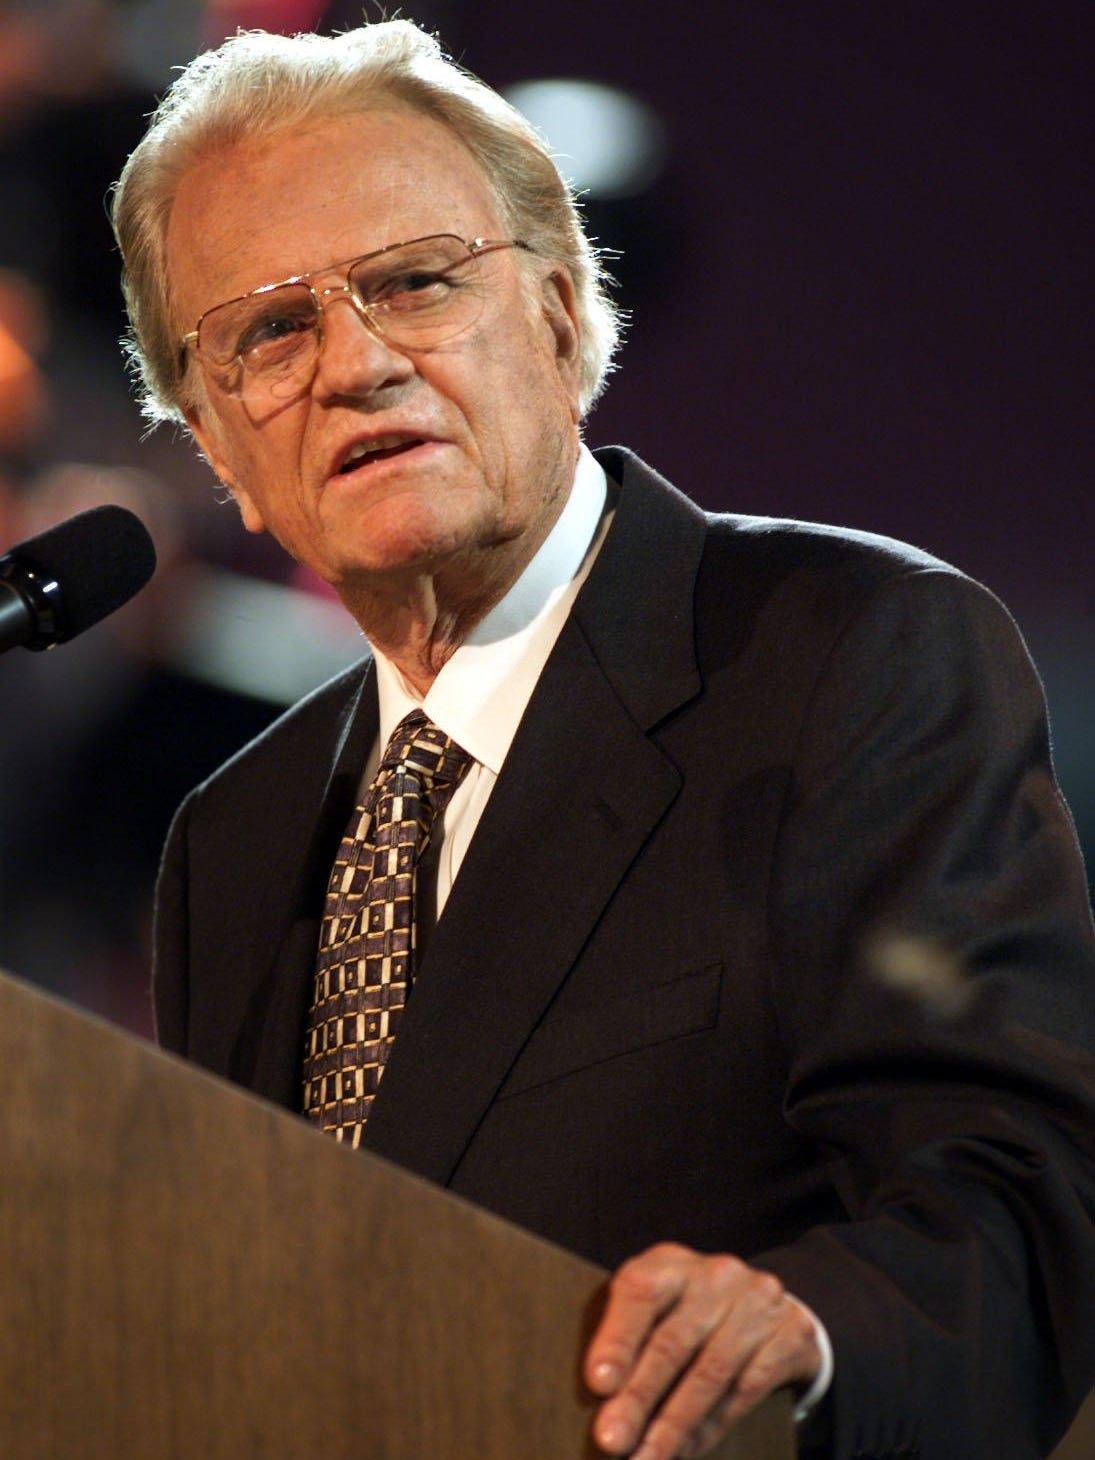 DOWNLOAD MP3: HEALED WITH HIS STRIPES By Evangelist Billy Graham (Audio) 1